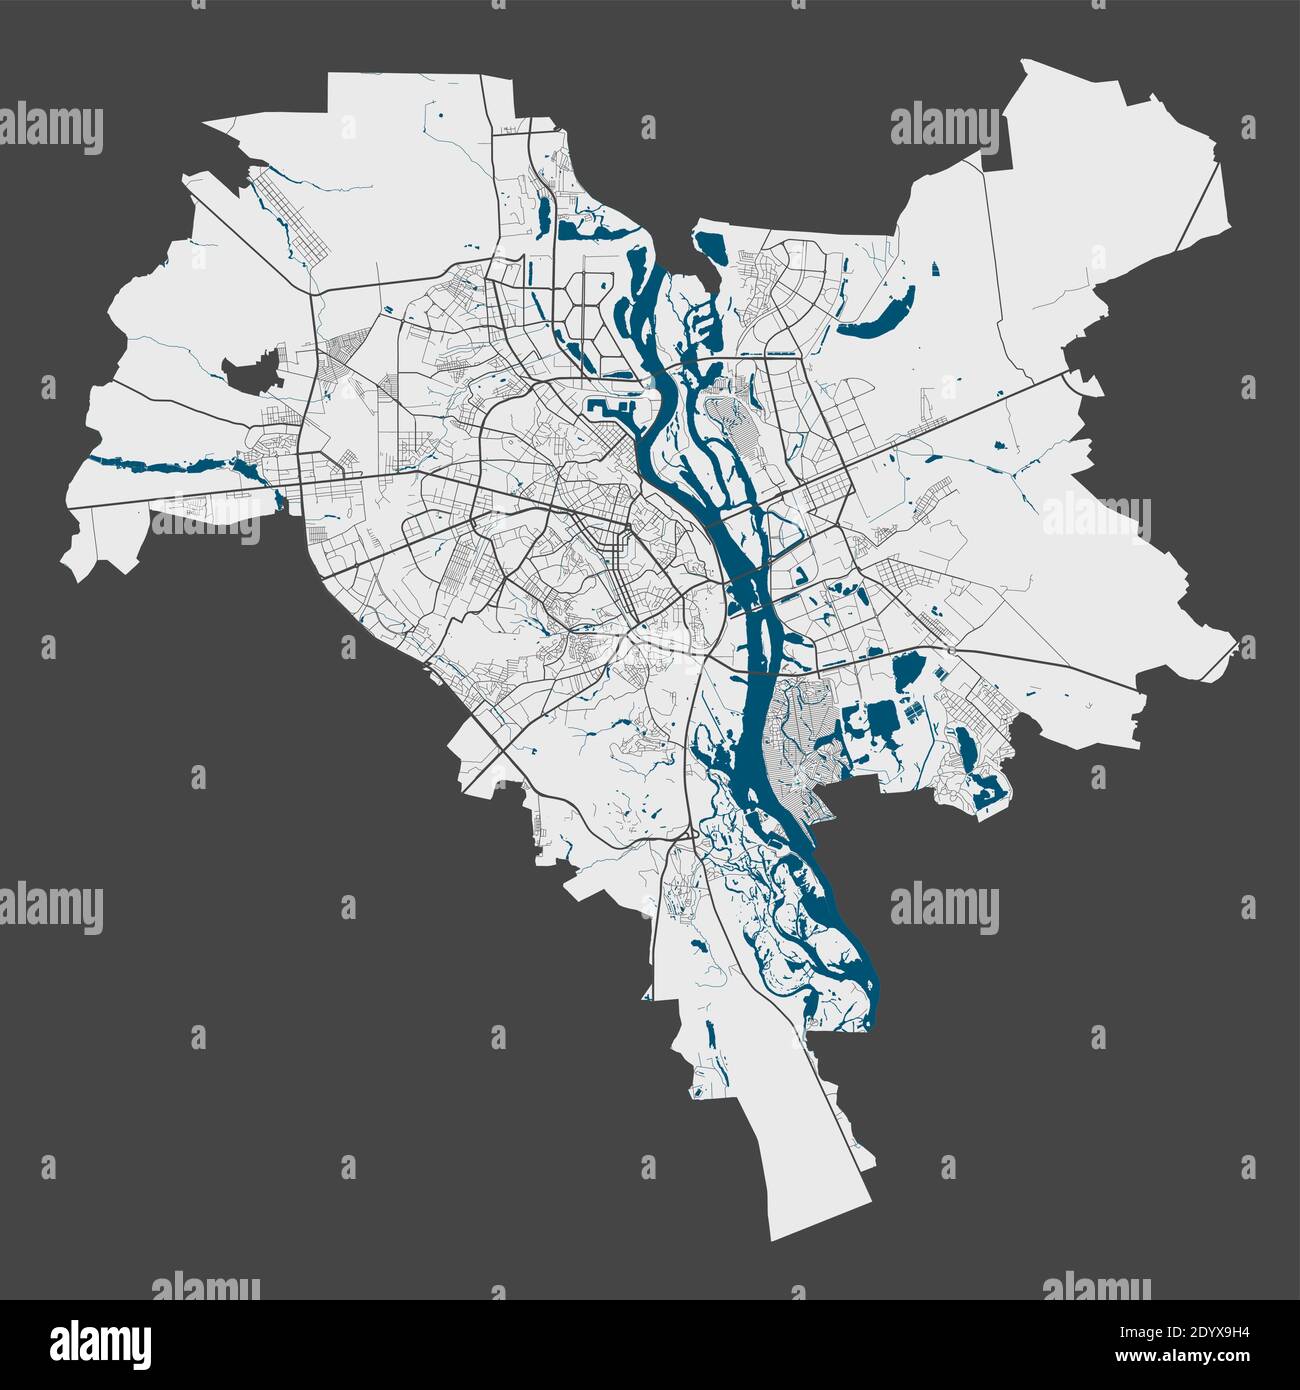 Kyiv Kiev map. Detailed map of Kyiv Kiev city administrative area. Cityscape panorama. Royalty free vector illustration. Outline map with highways, st Stock Vector